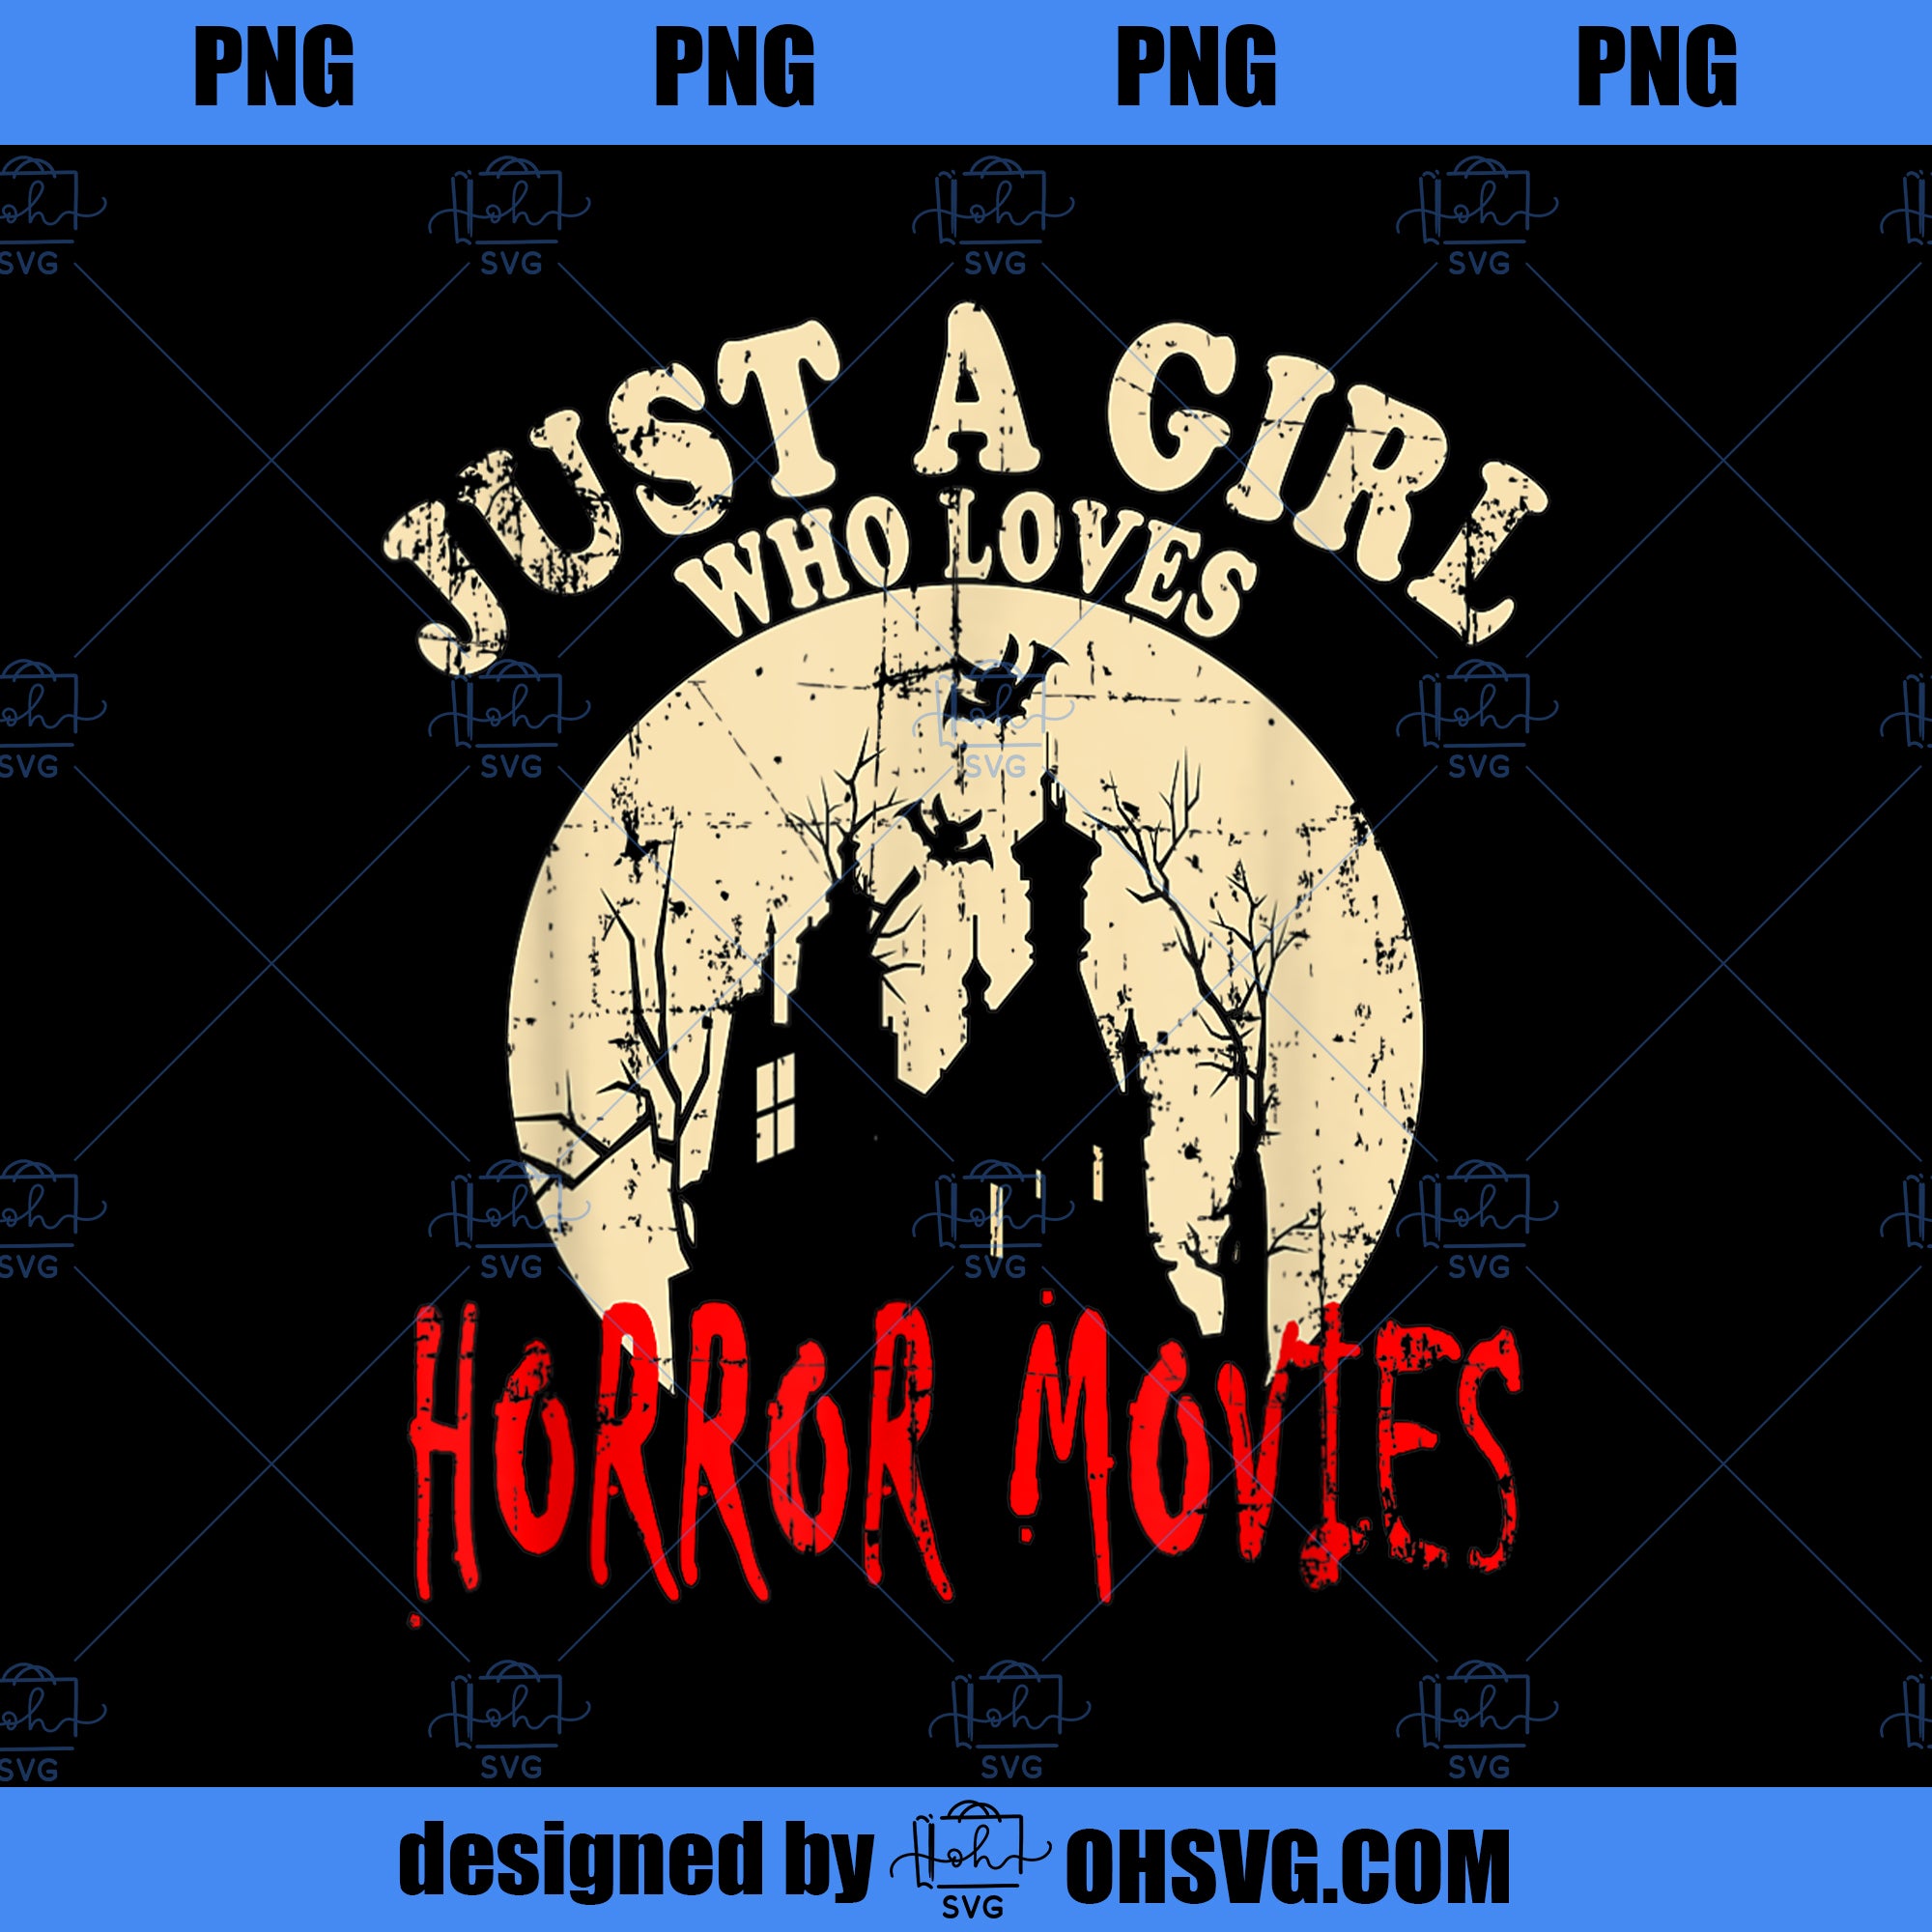 Just A Girl Who Loves Horror Movies PNG, Movies PNG, Horror Movies PNG